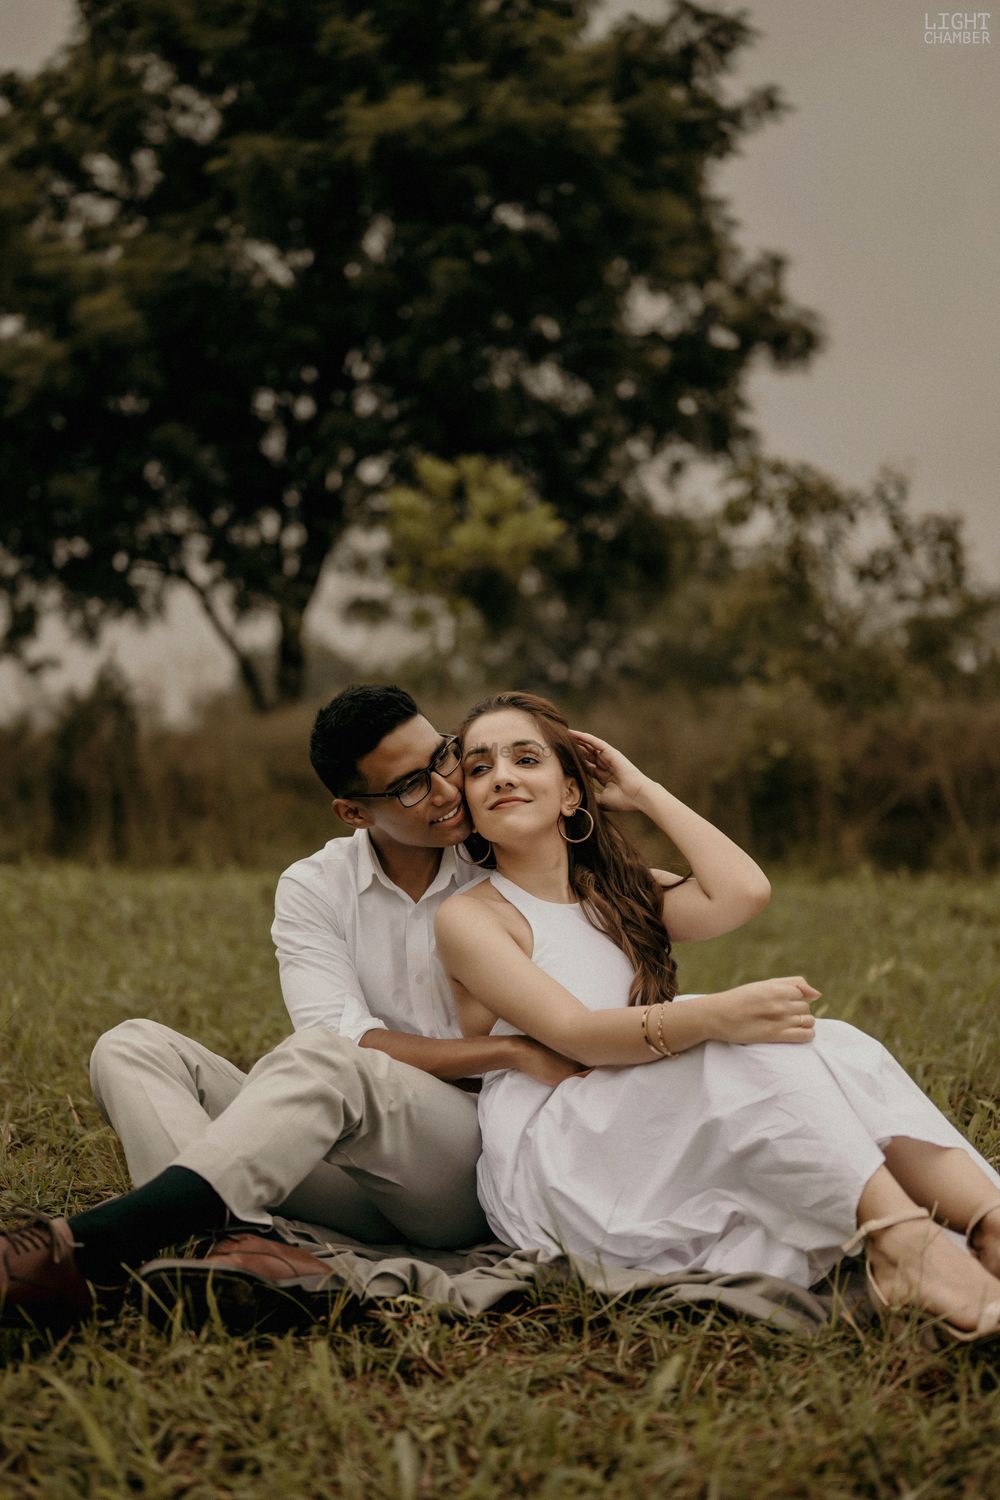 Photo From Preweddings | Couple Portraits - By Light Chamber